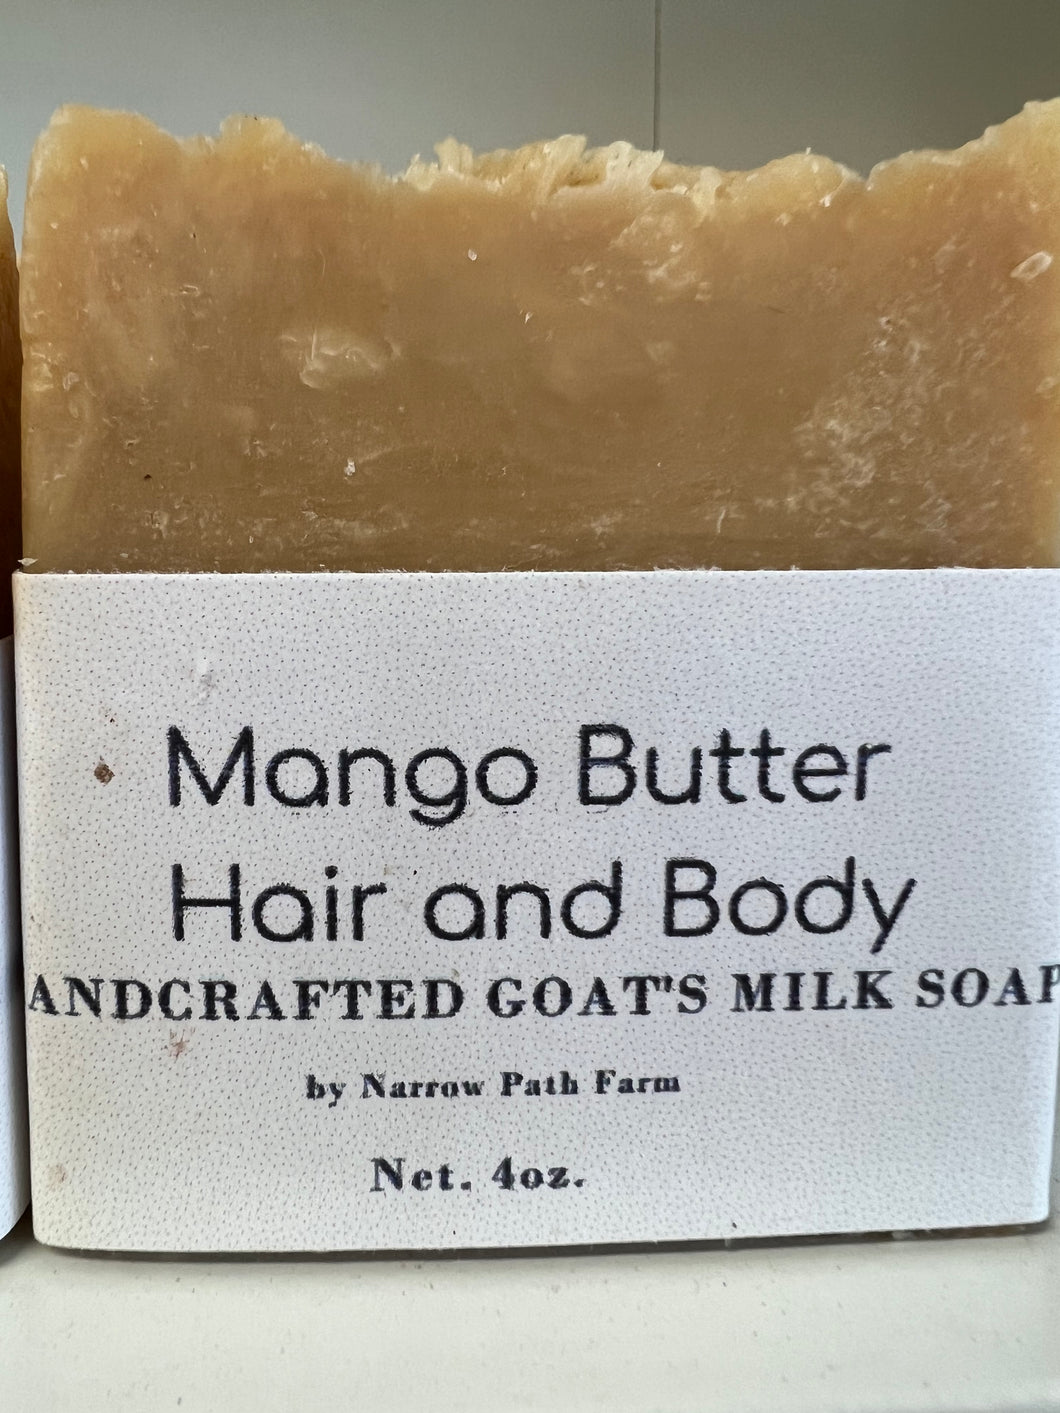 Hair and Body Goat's Milk Soap 4 oz